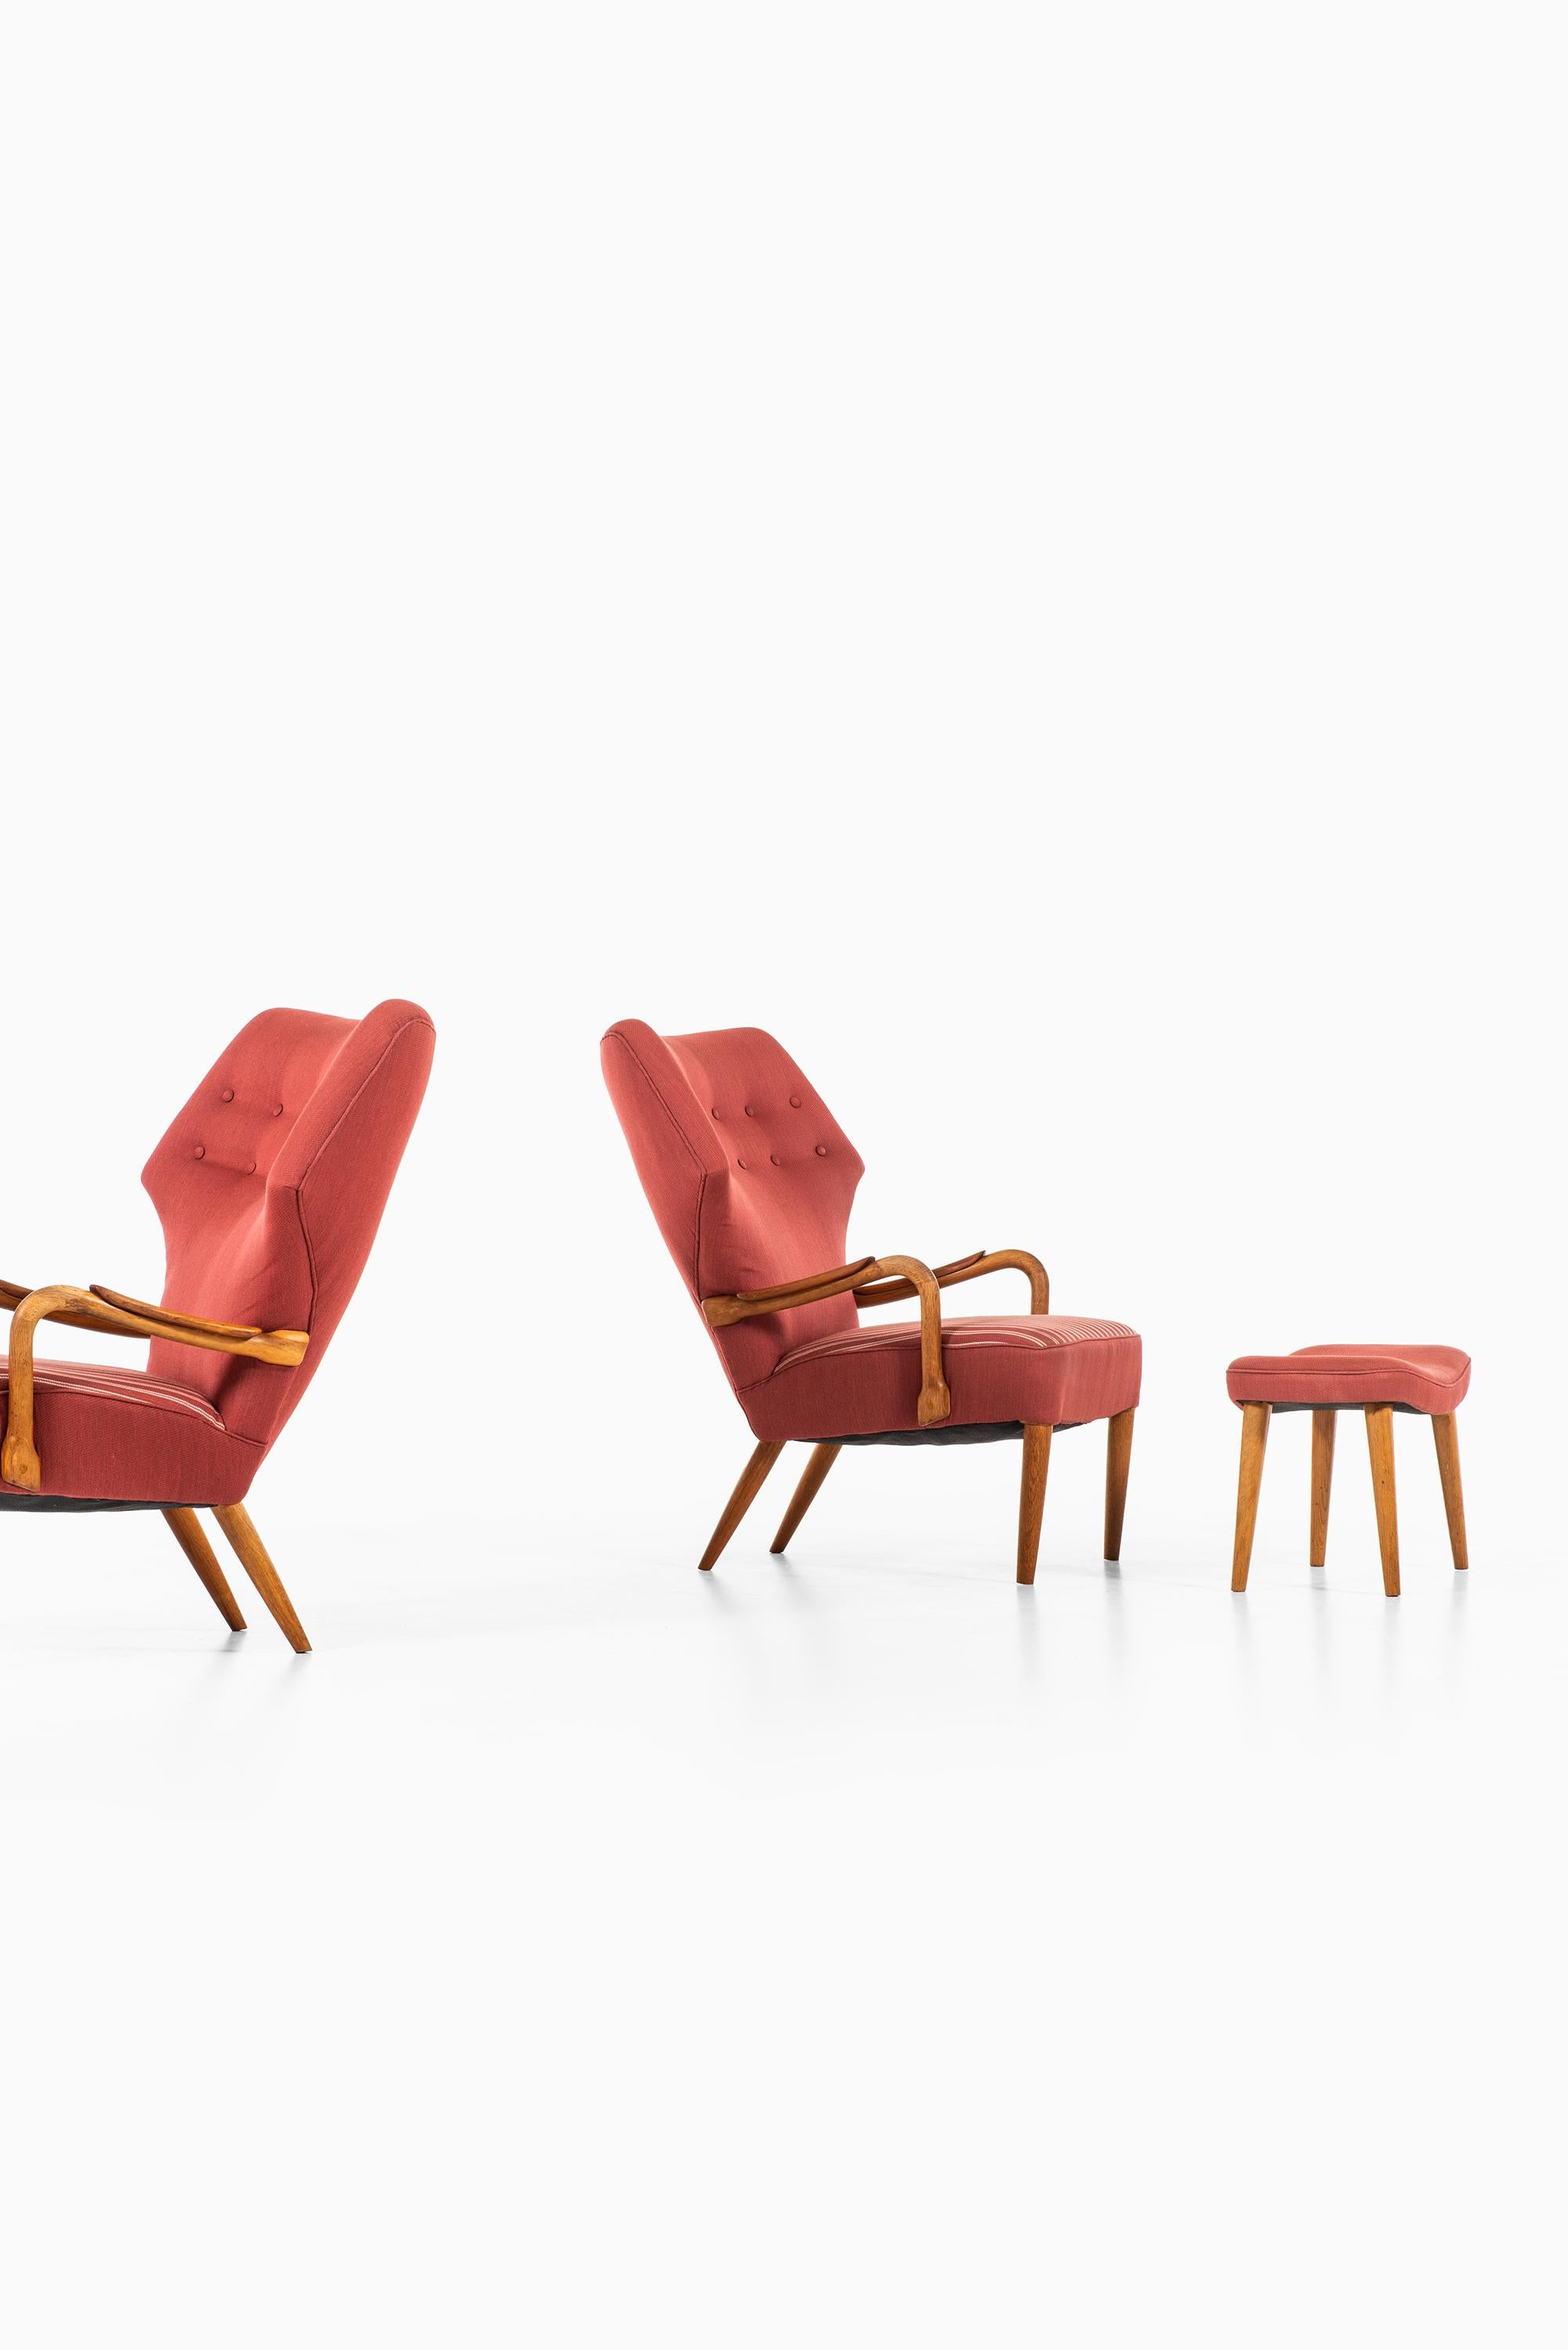 Rare pair of wingback easy chairs and stool attributed to Ib Madsen & Acton Schubell. Produced by E. & Sv. Olsen in Denmark.